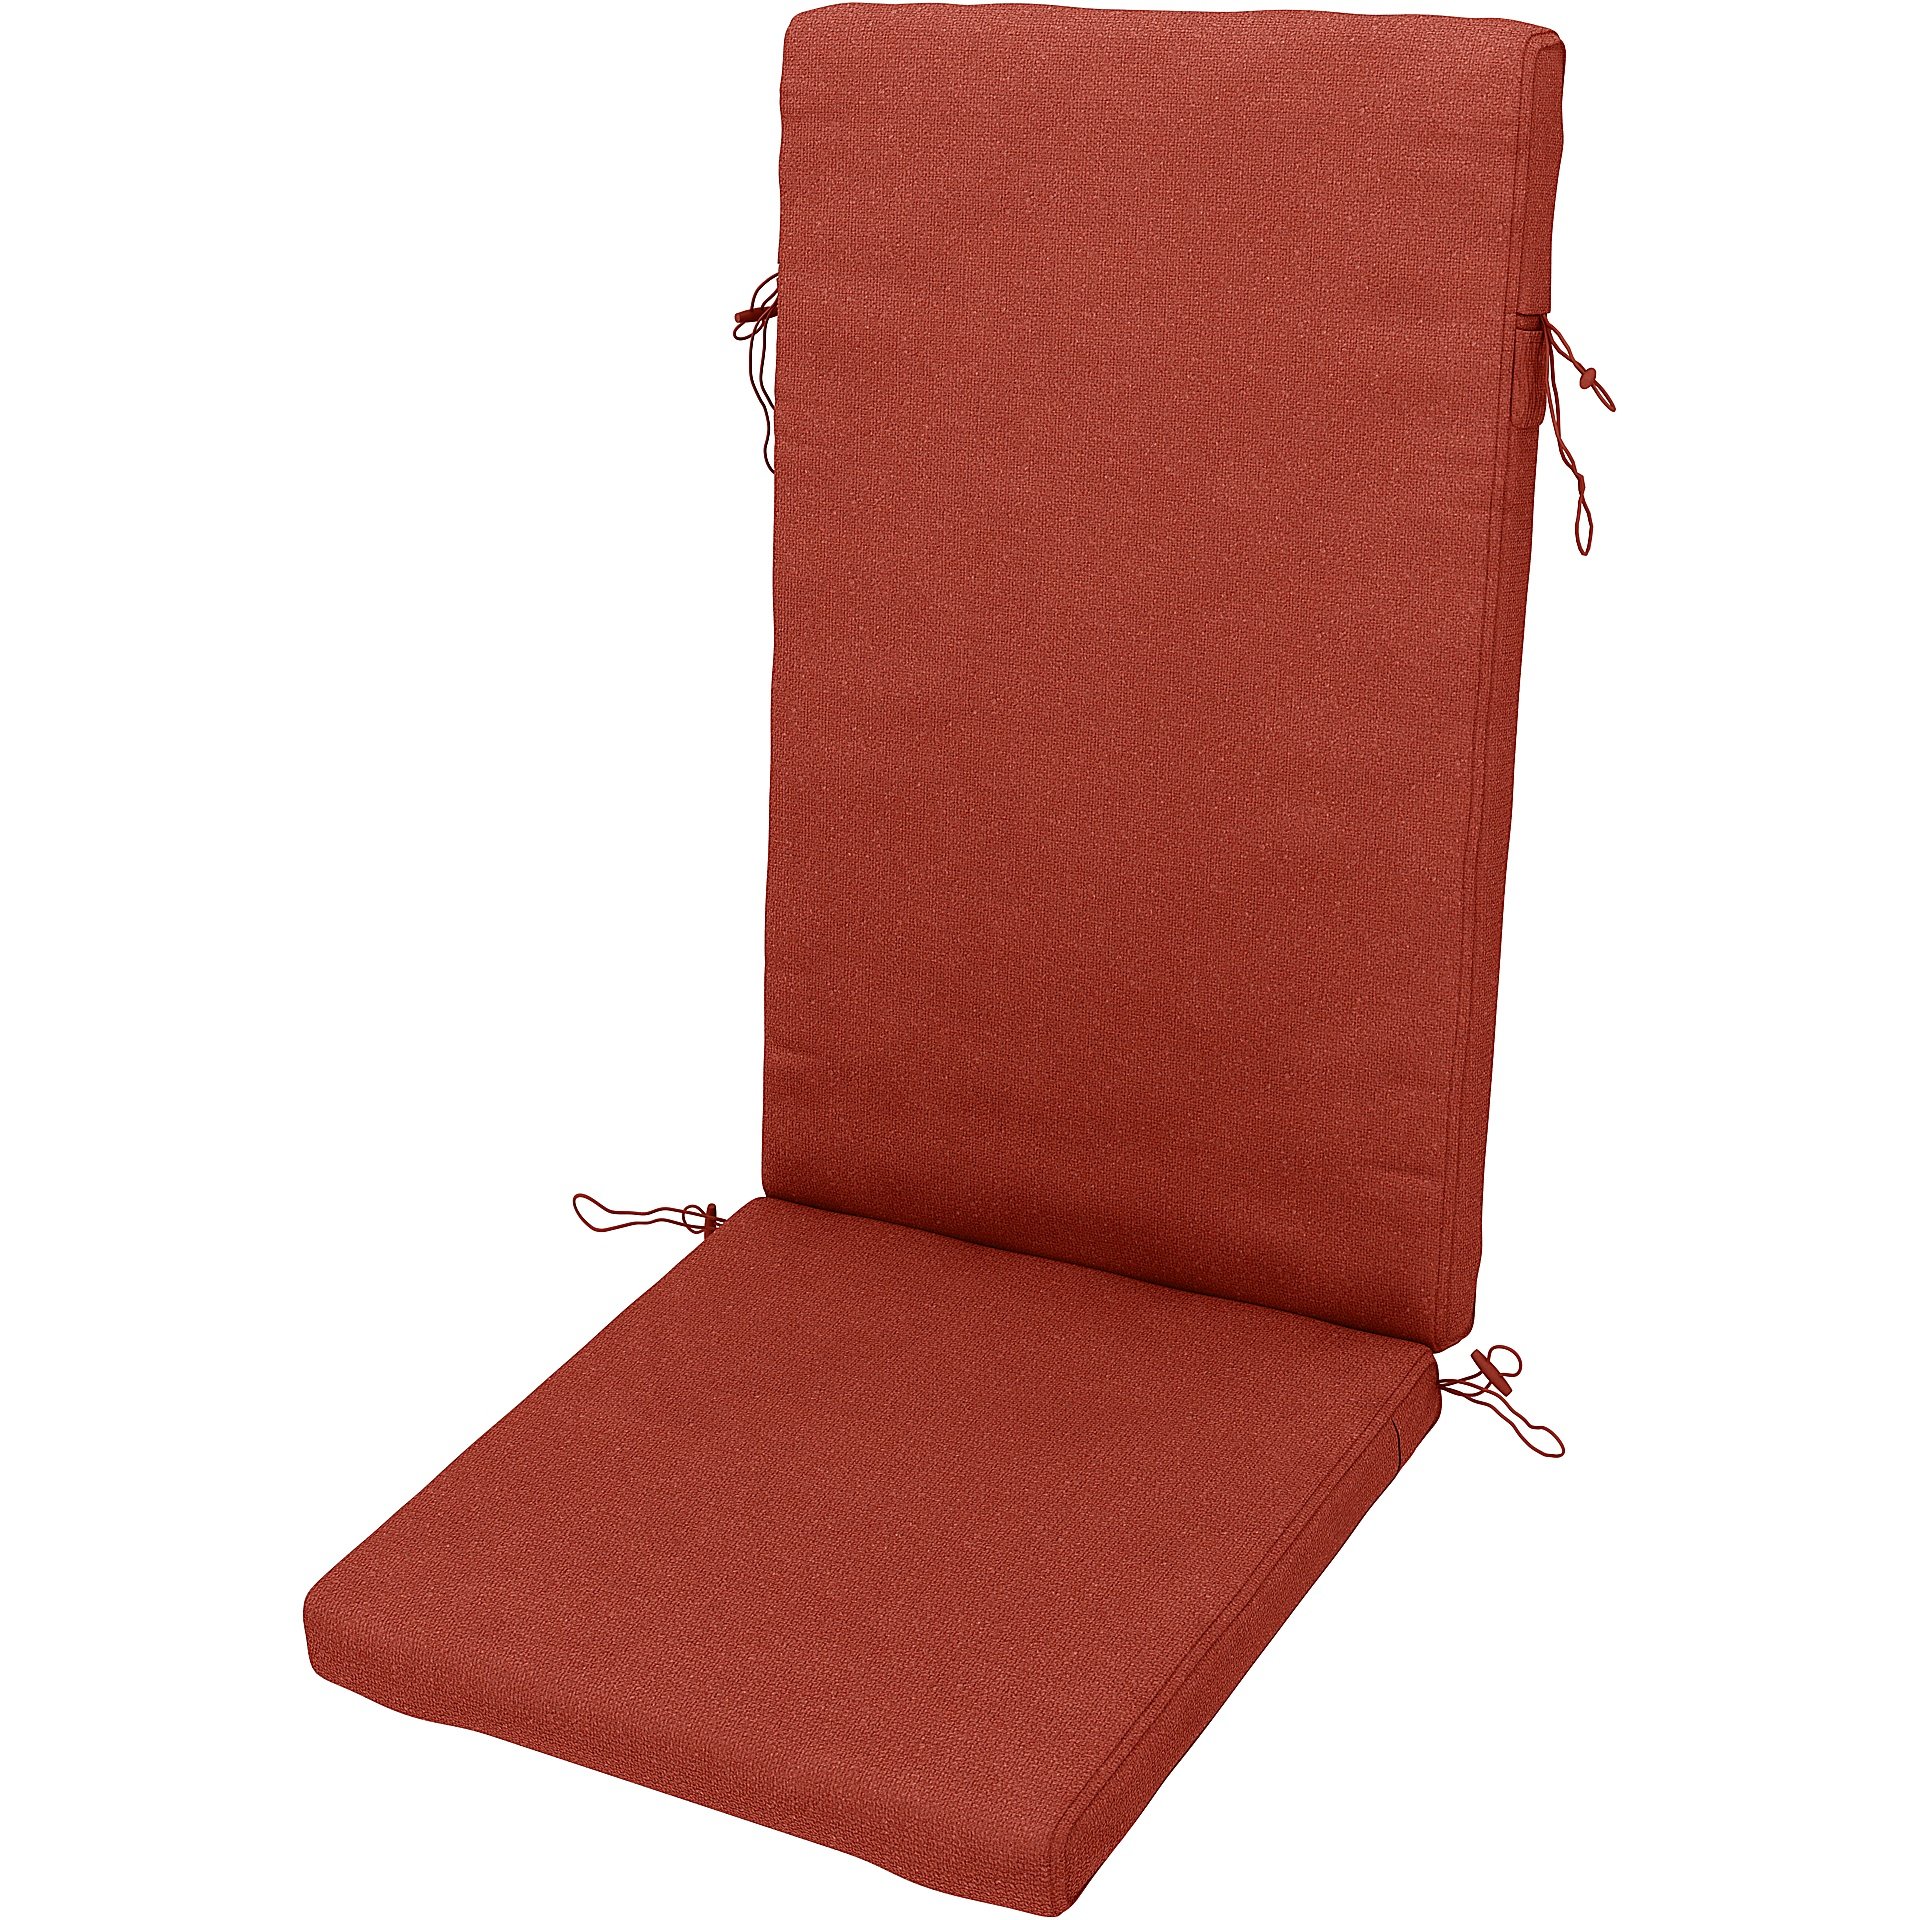 IKEA - Duvholmen Position Chair Cushion Cover , Coral Red, Outdoor - Bemz